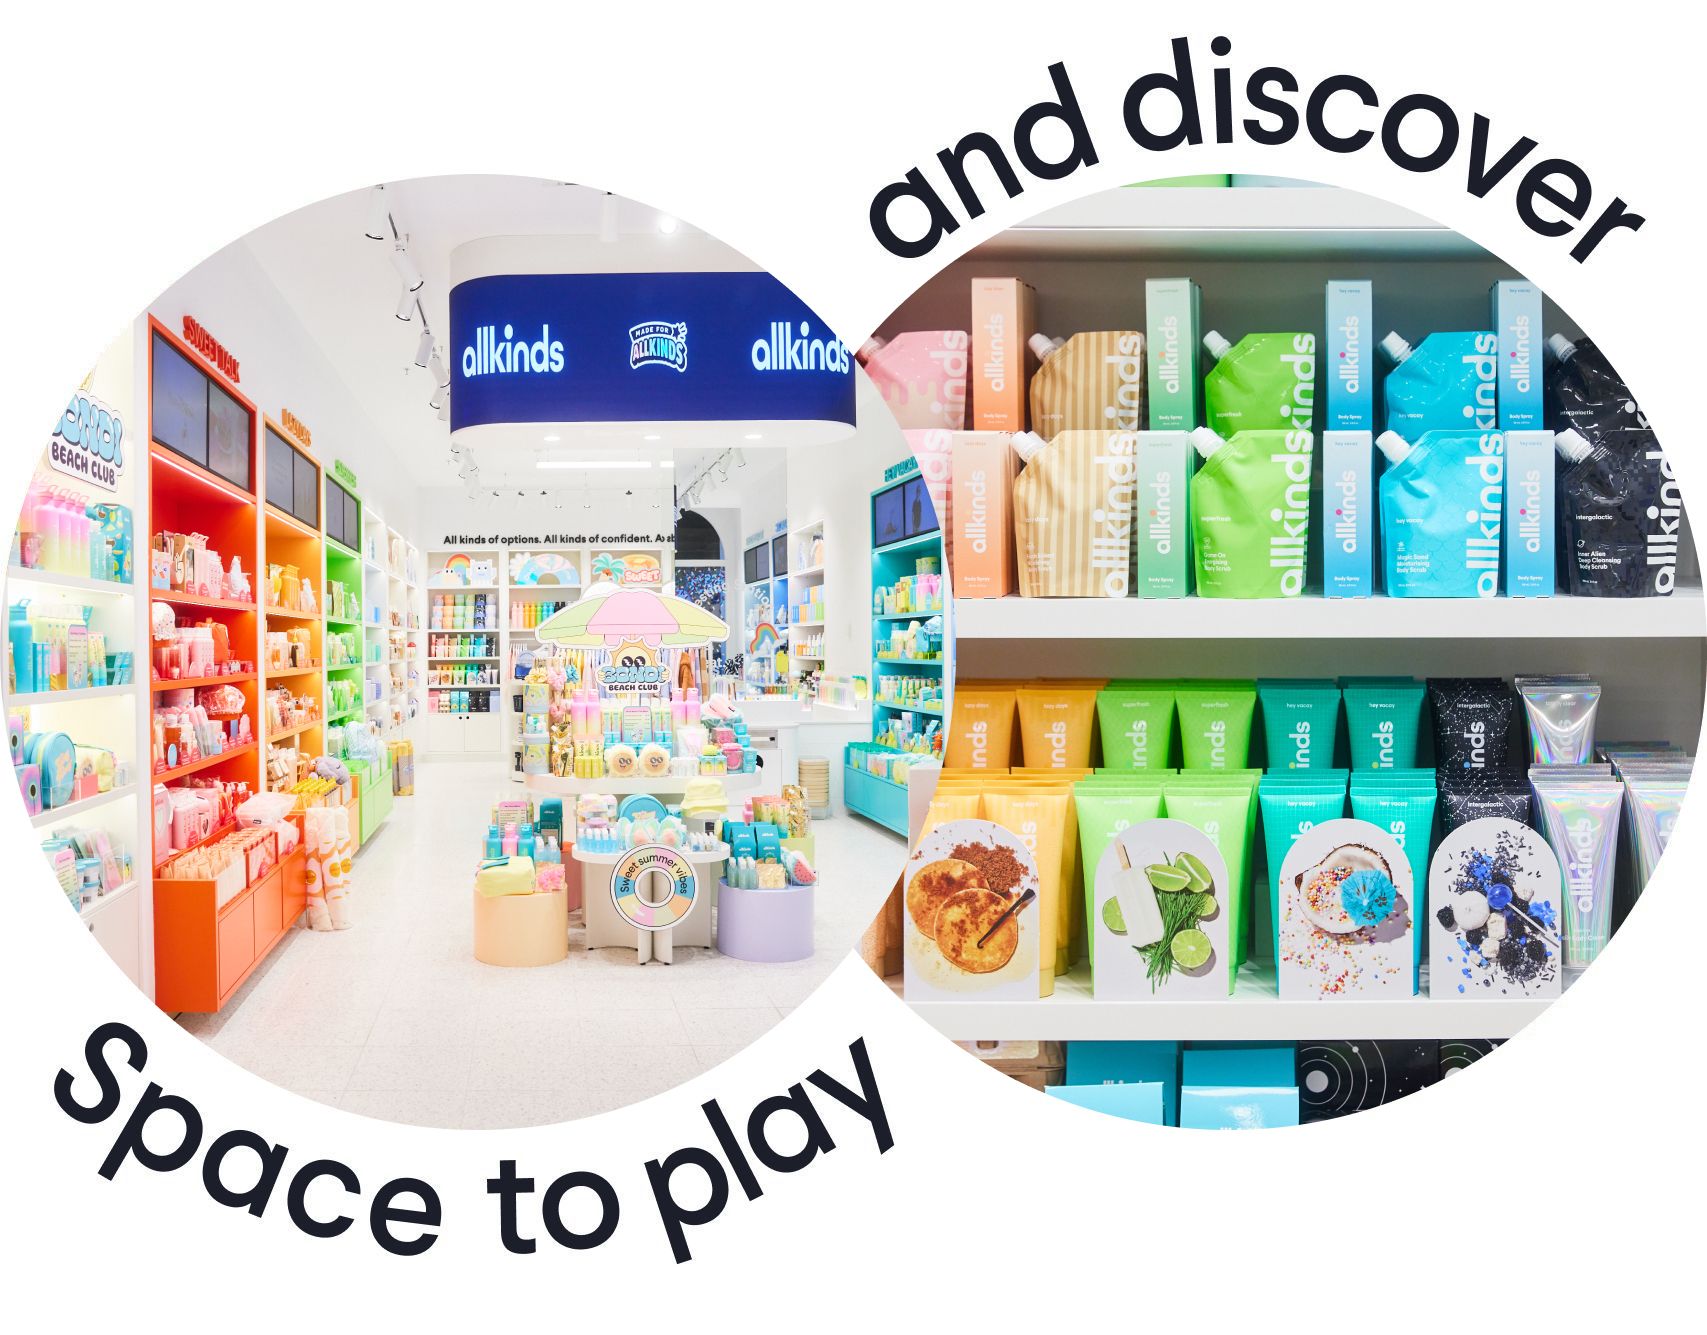 Space to play and discover